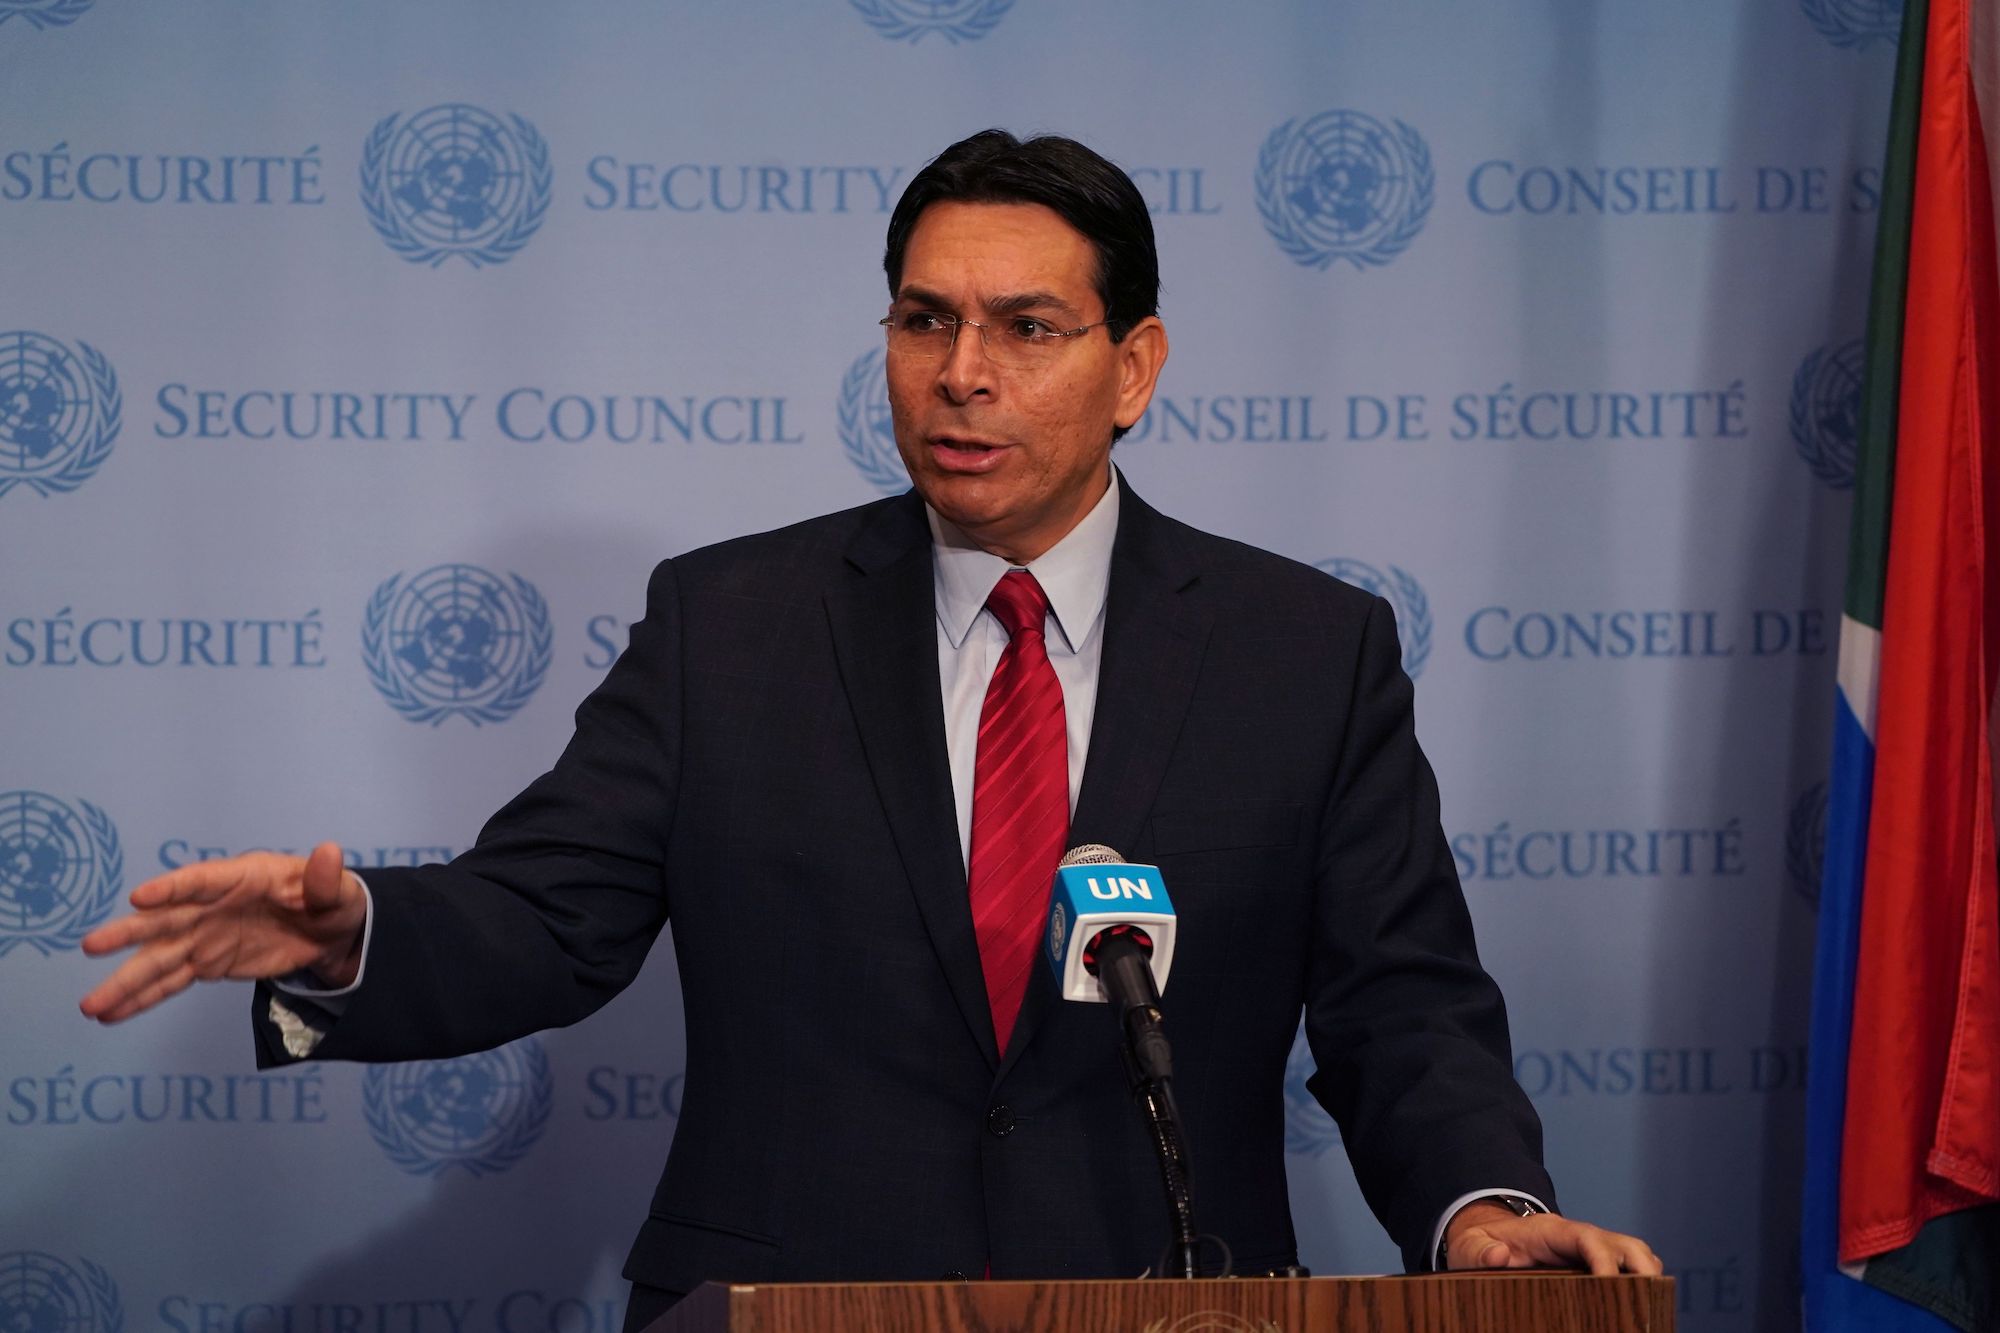 Danny Danon, speaks to the press at the UN Headquarters in New York on November 20, 2019.